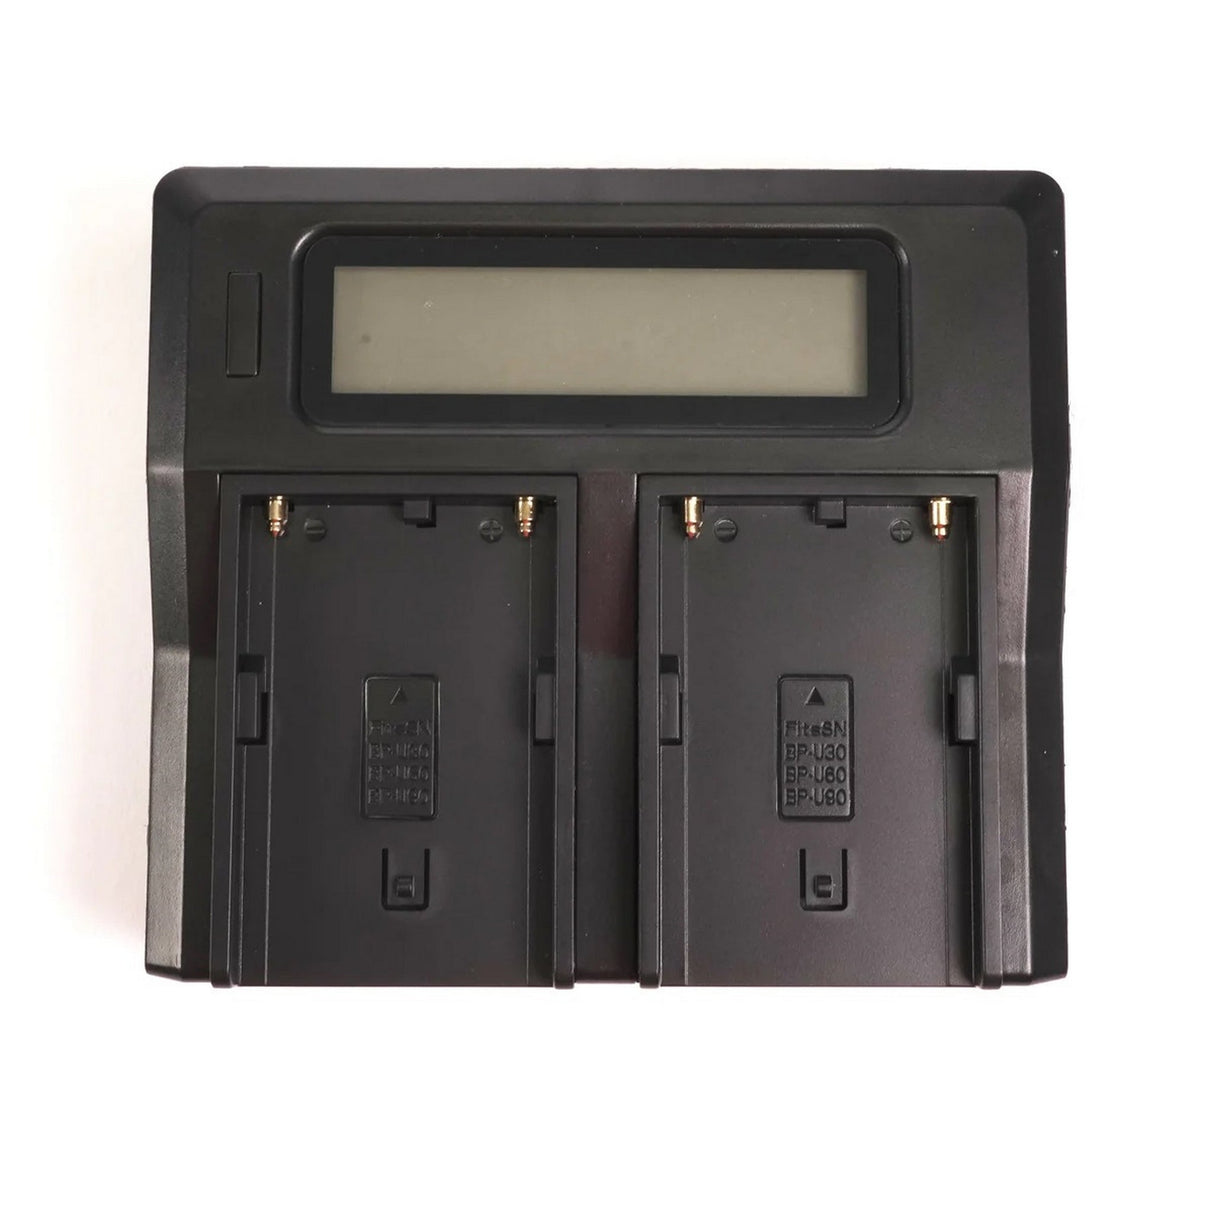 IndiPRO INBPUCG Dual LCD Charger for BP-U Series Batteries